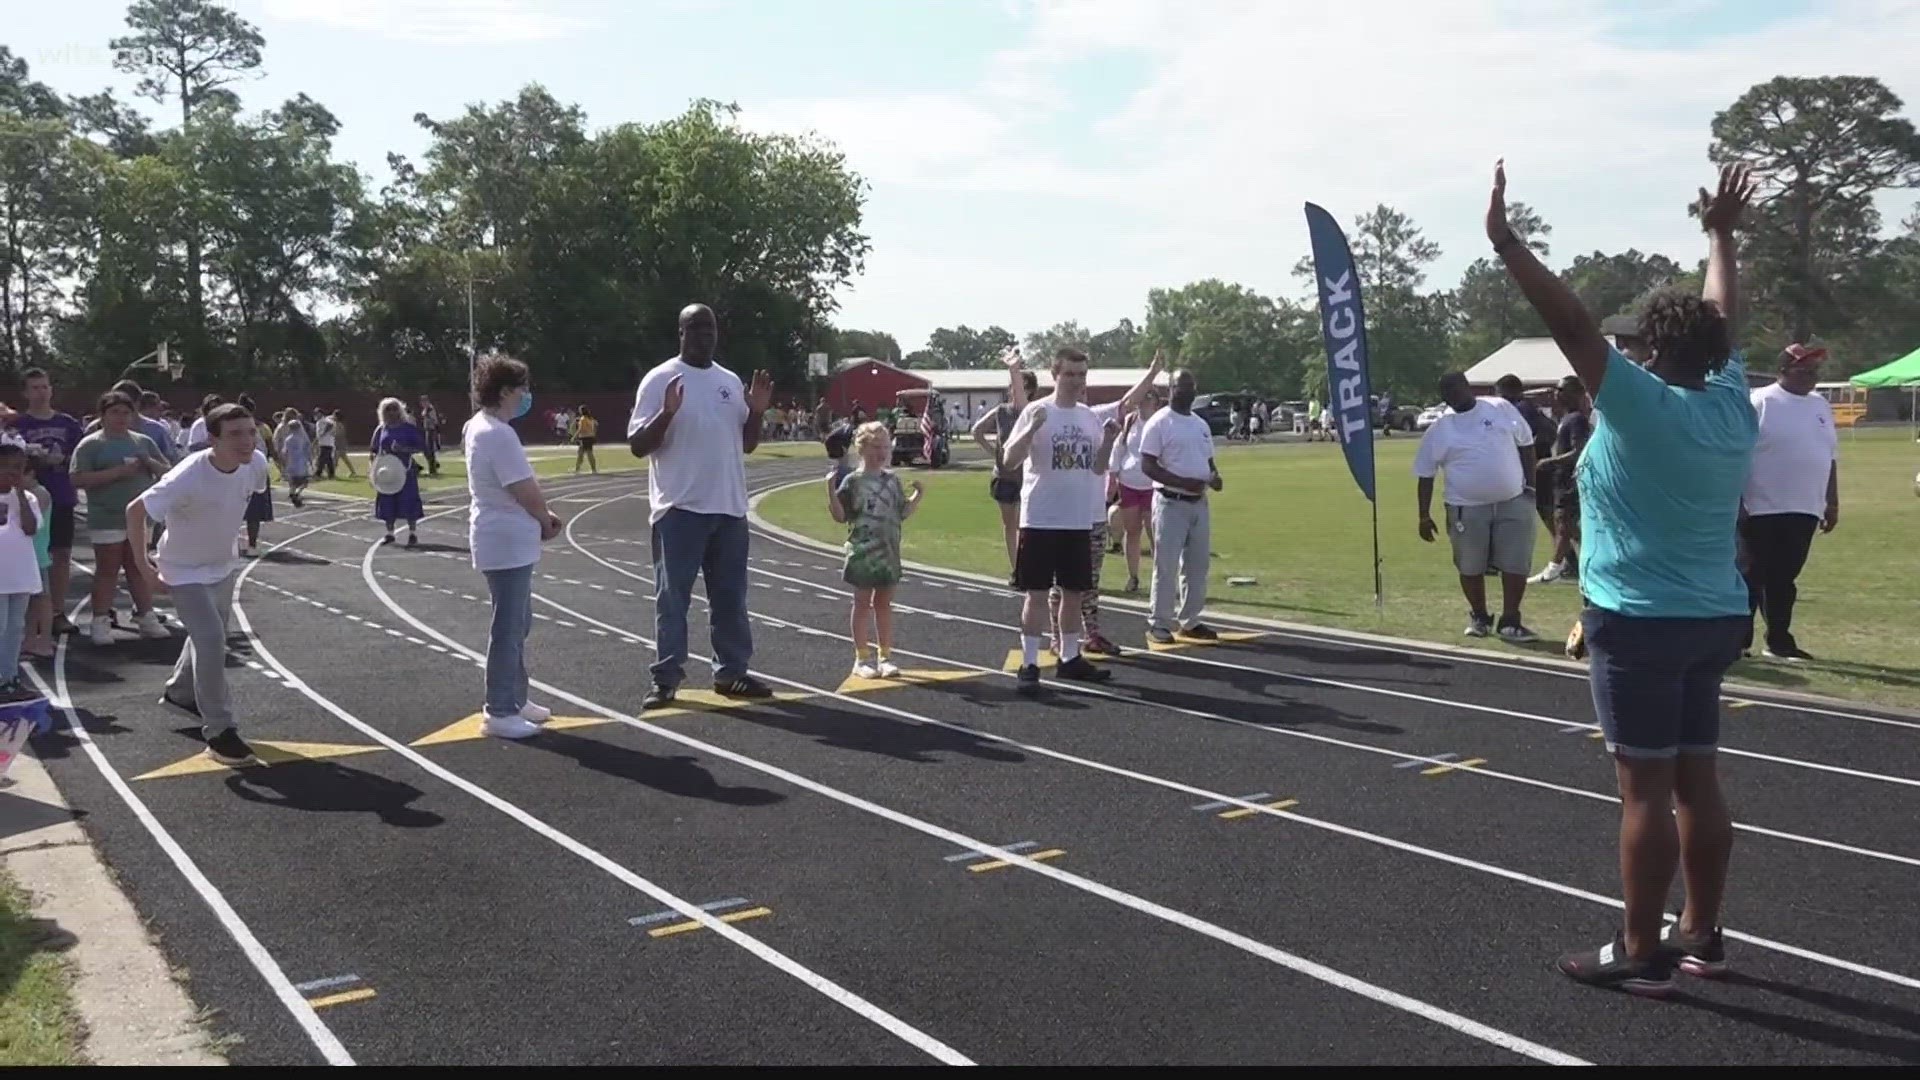 It was a day of competing and celebration for the 560 athletes who came out to Kershaw County's Special Olympics.